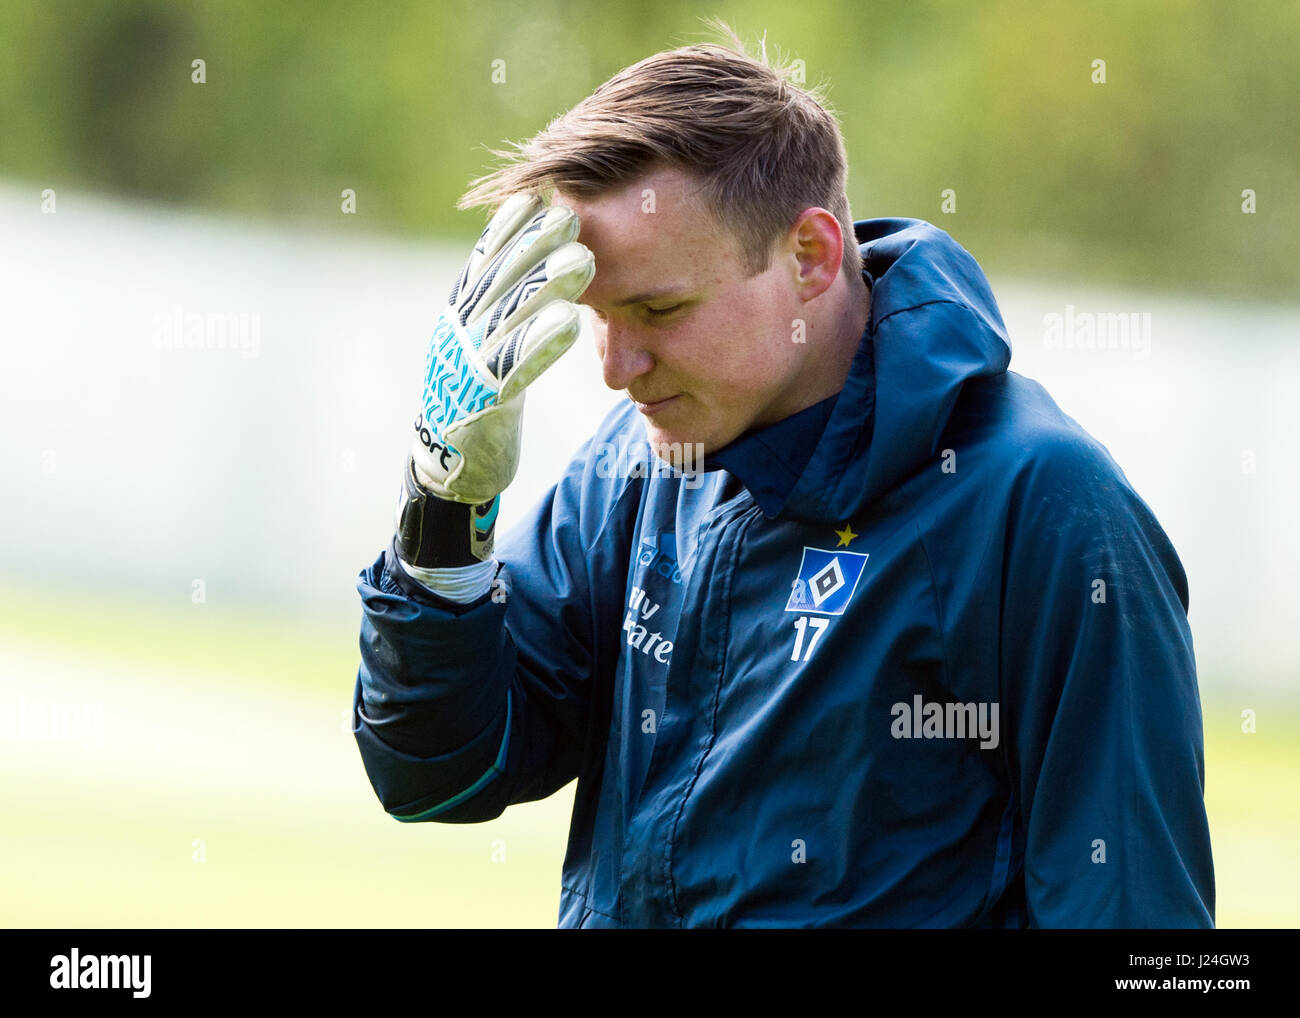 Hamburg, Germany. 25th Apr, 2017. Tom Mickel, the third goalkeeper of German Bundesliga soccer club Hamburger SV, reacts during a training session on the training grounds in Hamburg, Germany, 25 April 2017. After injuring his knee, it is not determined whether HSV keeper Mathenia will be able to play against Augsburg. Photo: Christophe Gateau/dpa/Alamy Live News Stock Photo